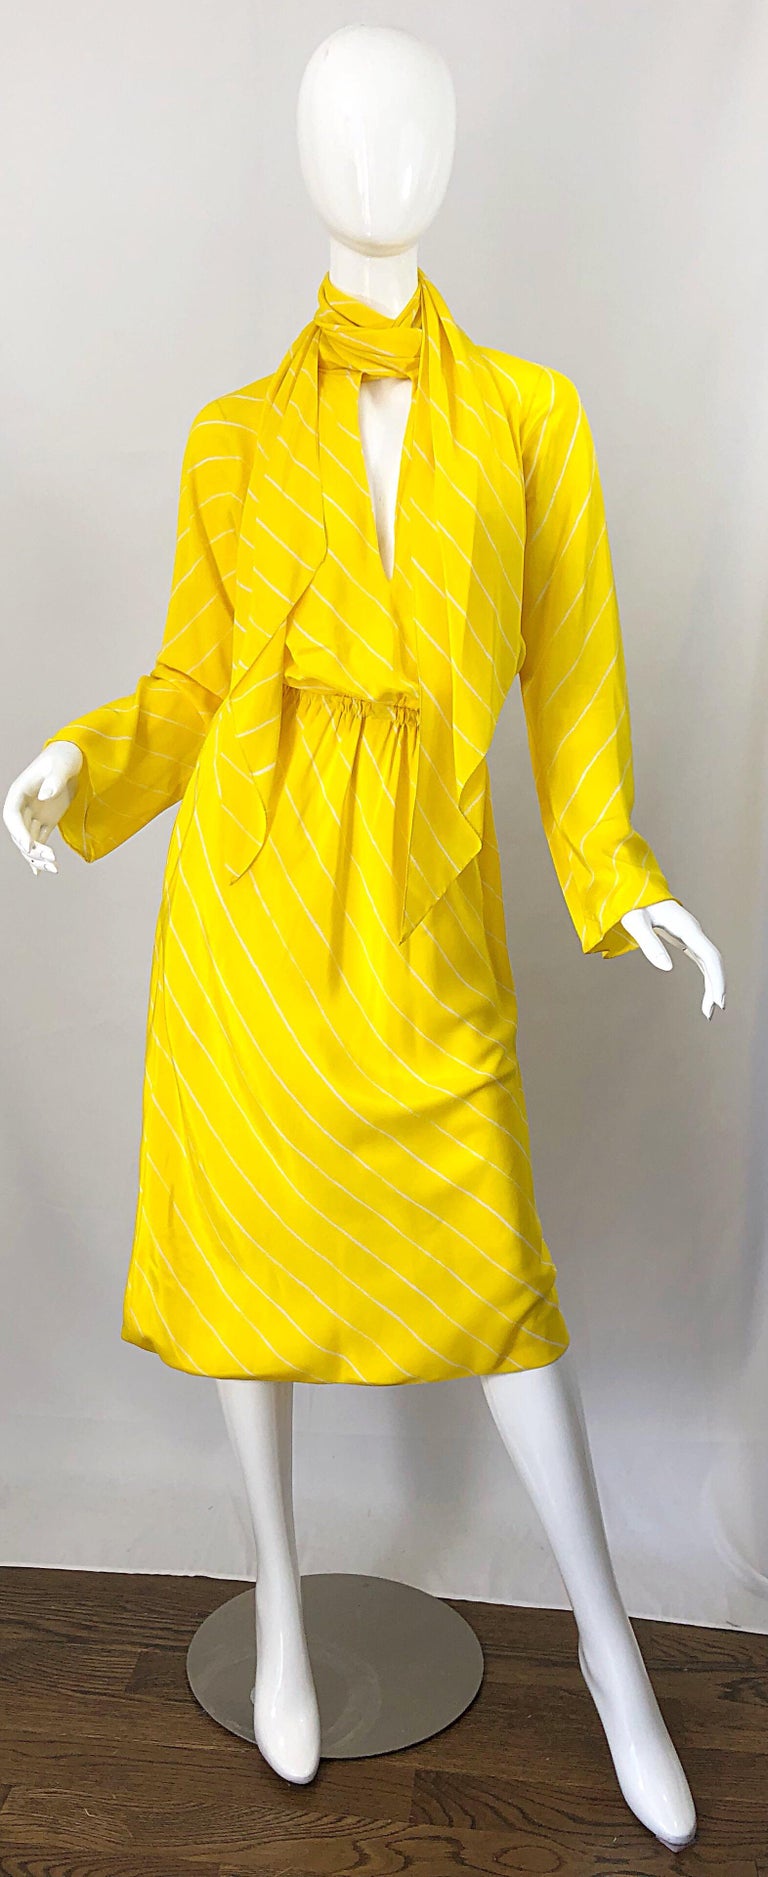 1970s Halston Canary Yellow + White Chevron Striped Bell Sleeve 70s Scarf Dress For Sale 11